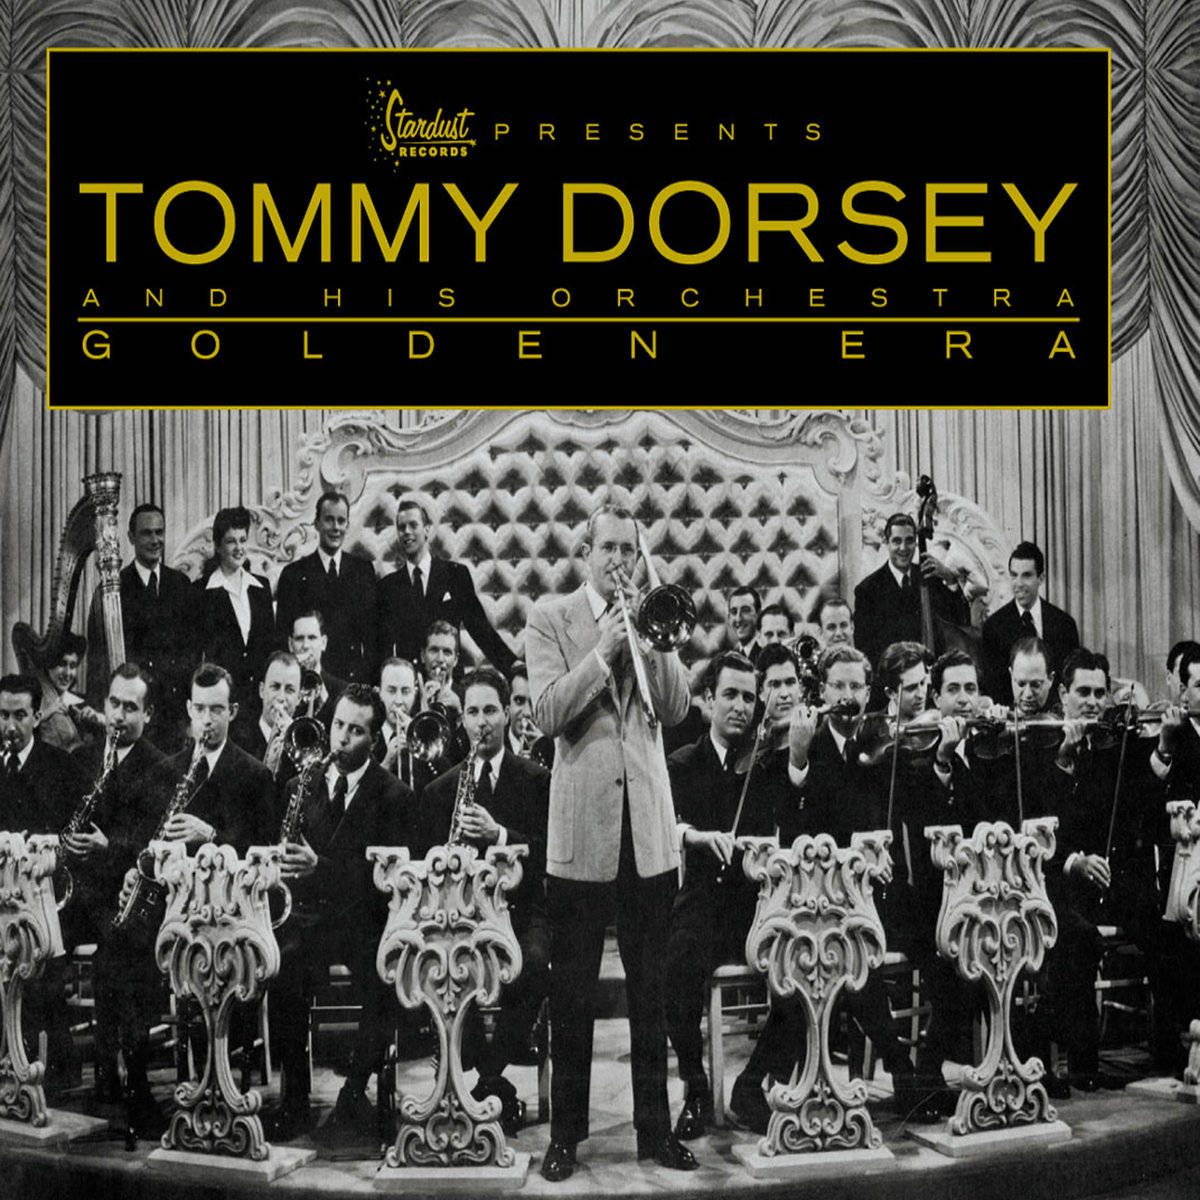 Tommy Dorsey and His Orchestra Showcasing Golden Era Wallpaper